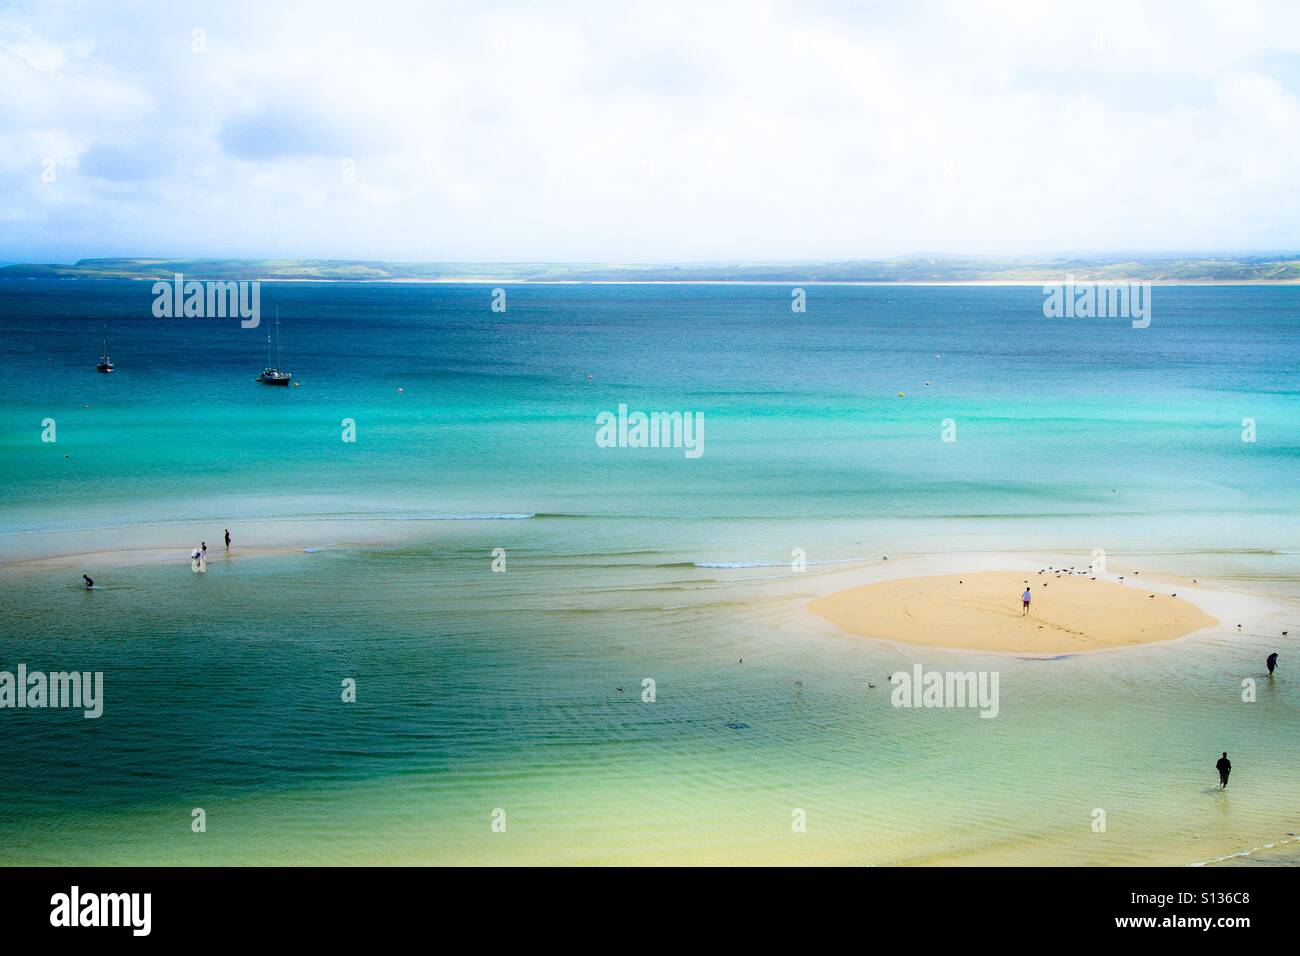 A dreamy beach from above with sand banks and holidaymakers scattered around and enjoying the emerald green ocean. Stock Photo